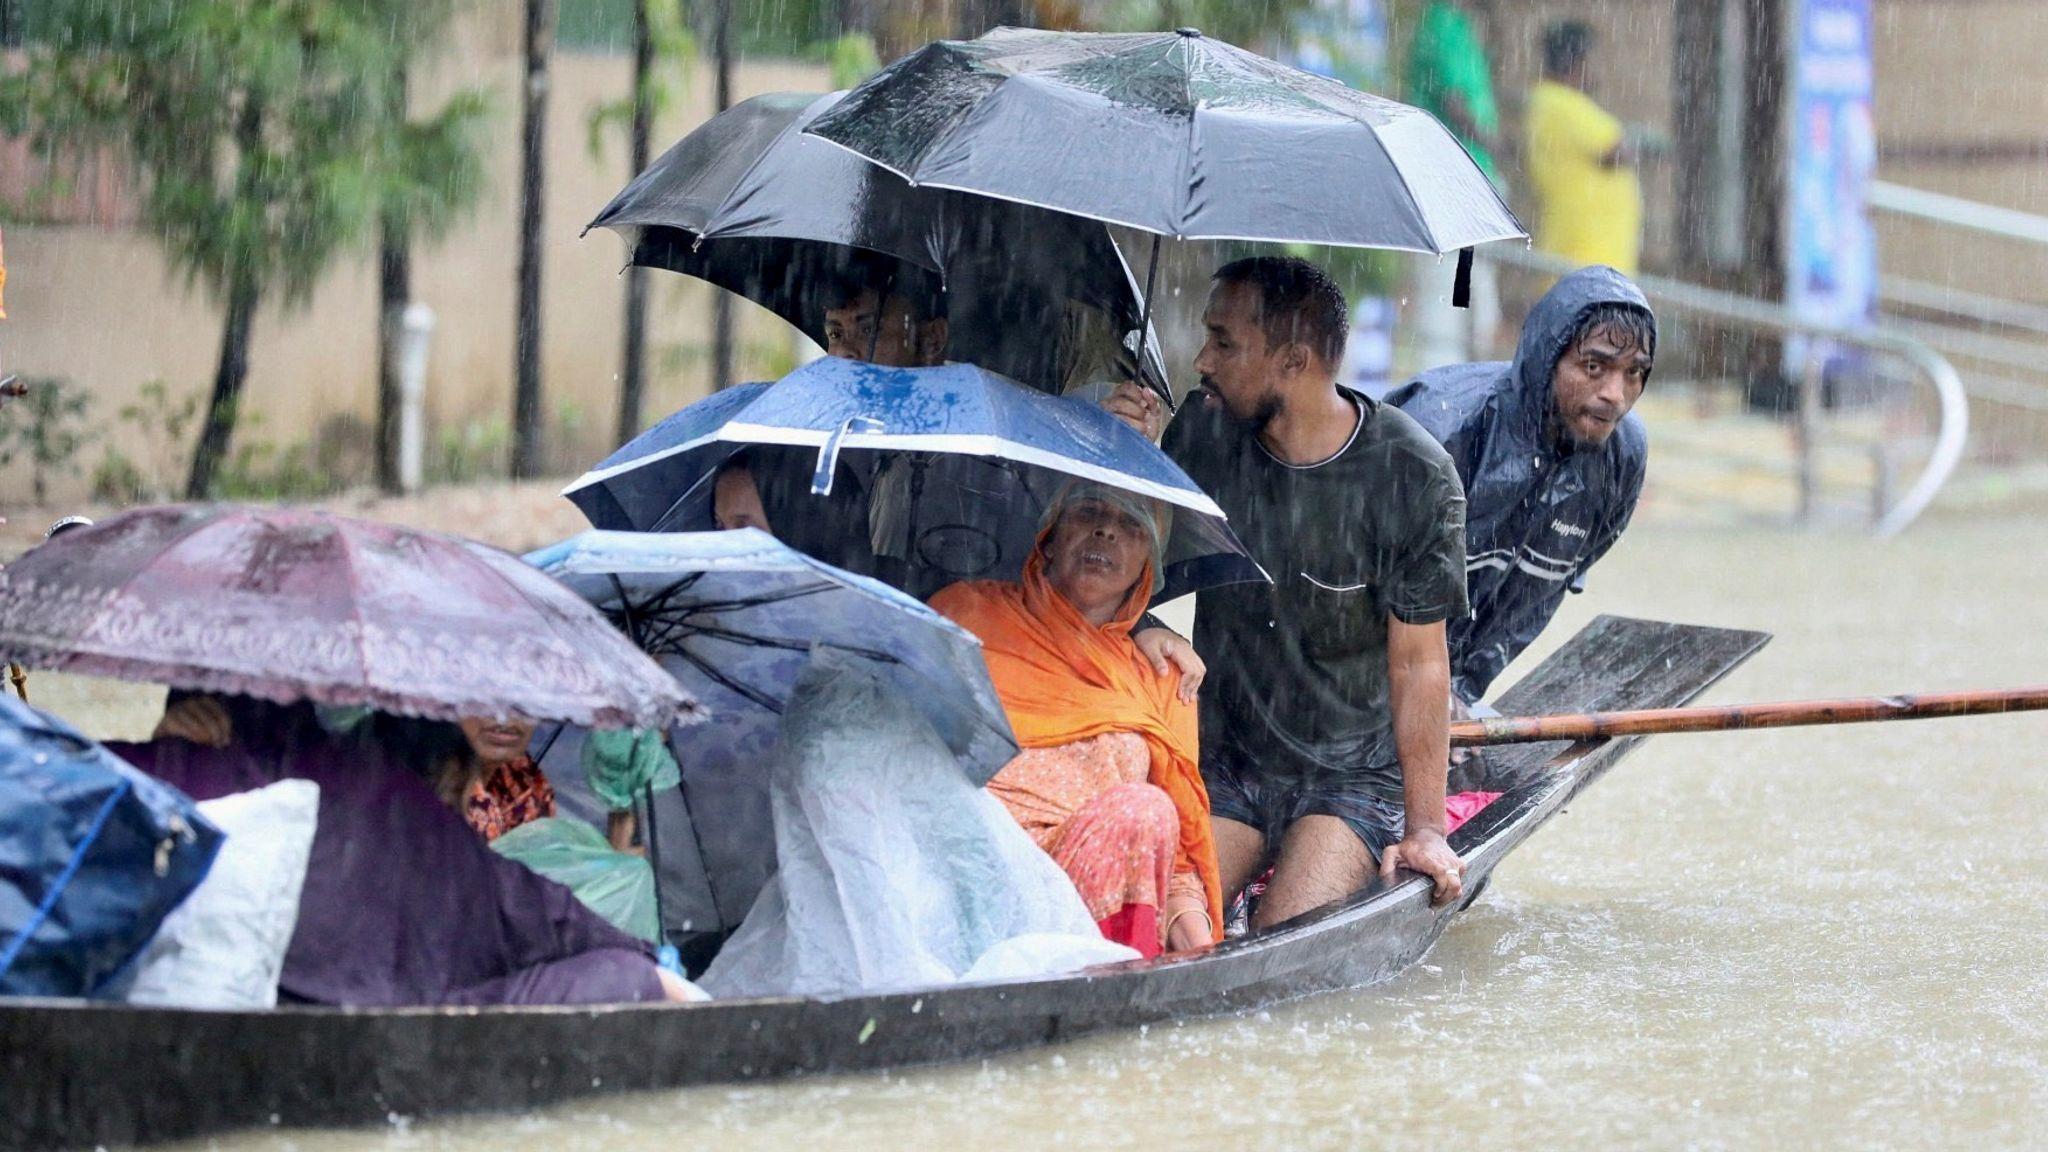 Floods in India and Bangladesh have killed dozens and trapped millions more people.